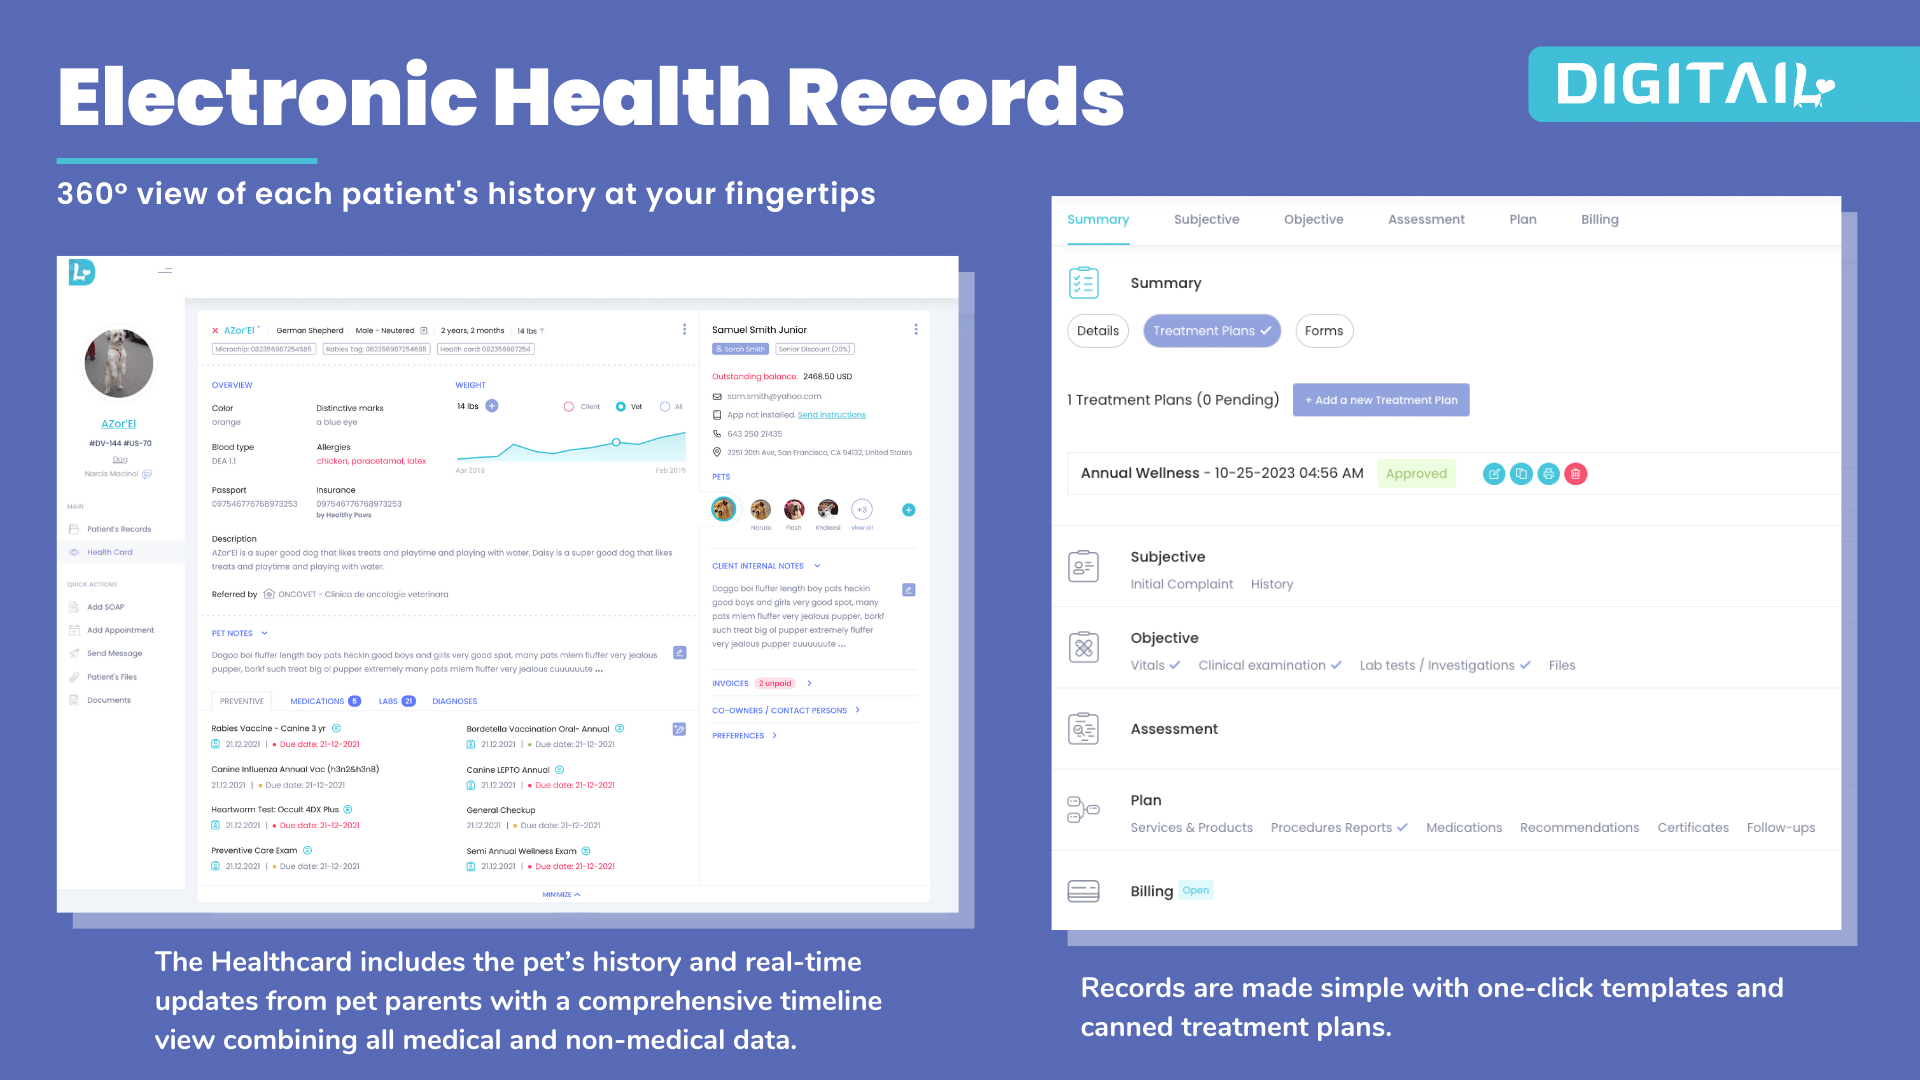 360° view of each patient's history at your fingertips